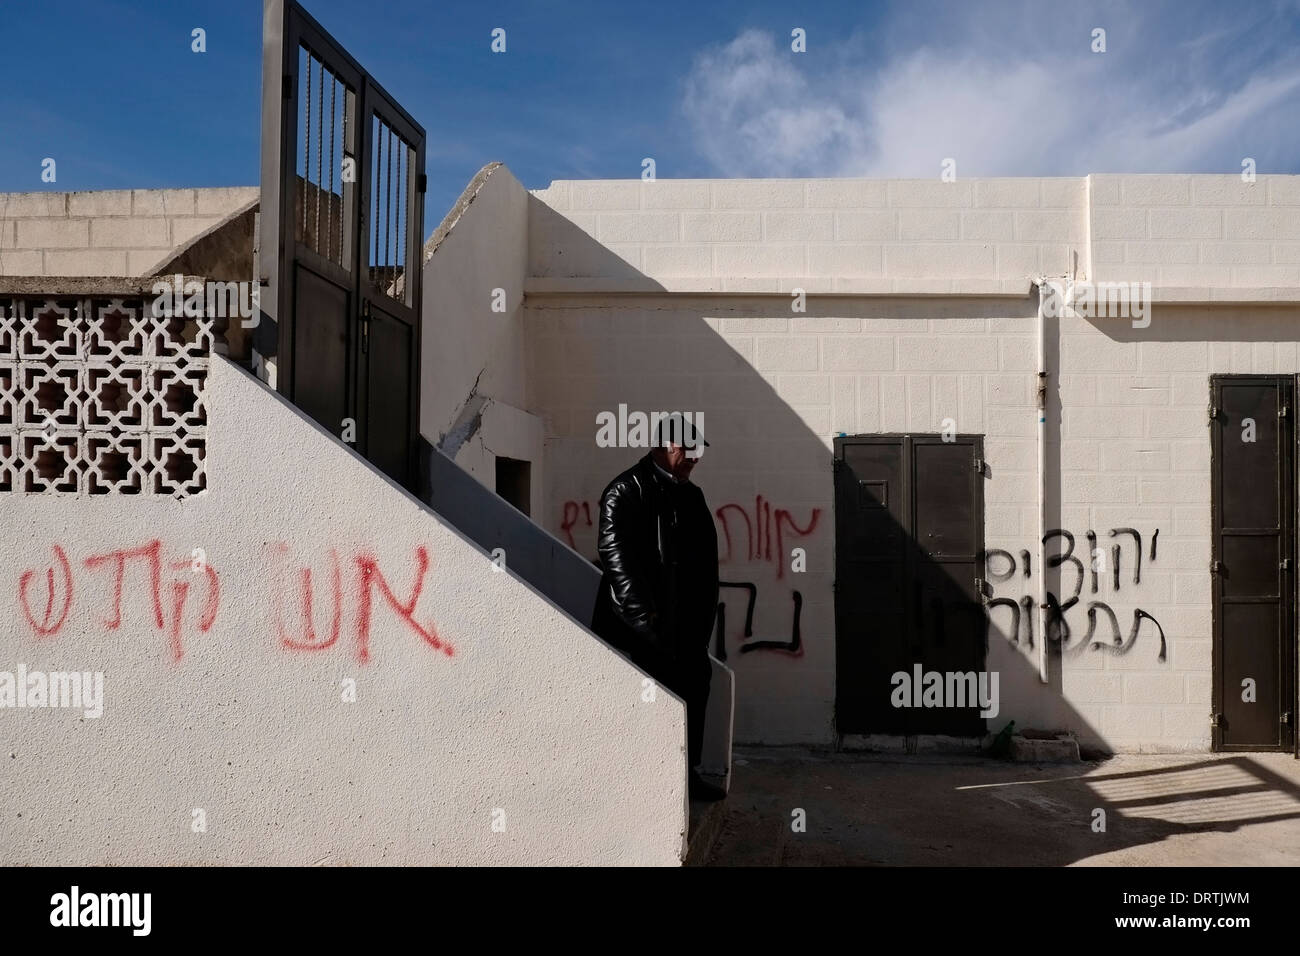 A Palestinian man stands at a house which was spray painted with inflammatory phrases such as 'Death to the Arabs', 'Revenge!' in apparent price tag attack near the Jewish settlement Ma'ale Levona at the West Bank Israel on 31 January 2014. “Price tag” is used to refer to acts of political violence carried out by right-wing Israelis protesting Israeli government policy regarding the settlements and the Palestinians. Stock Photo